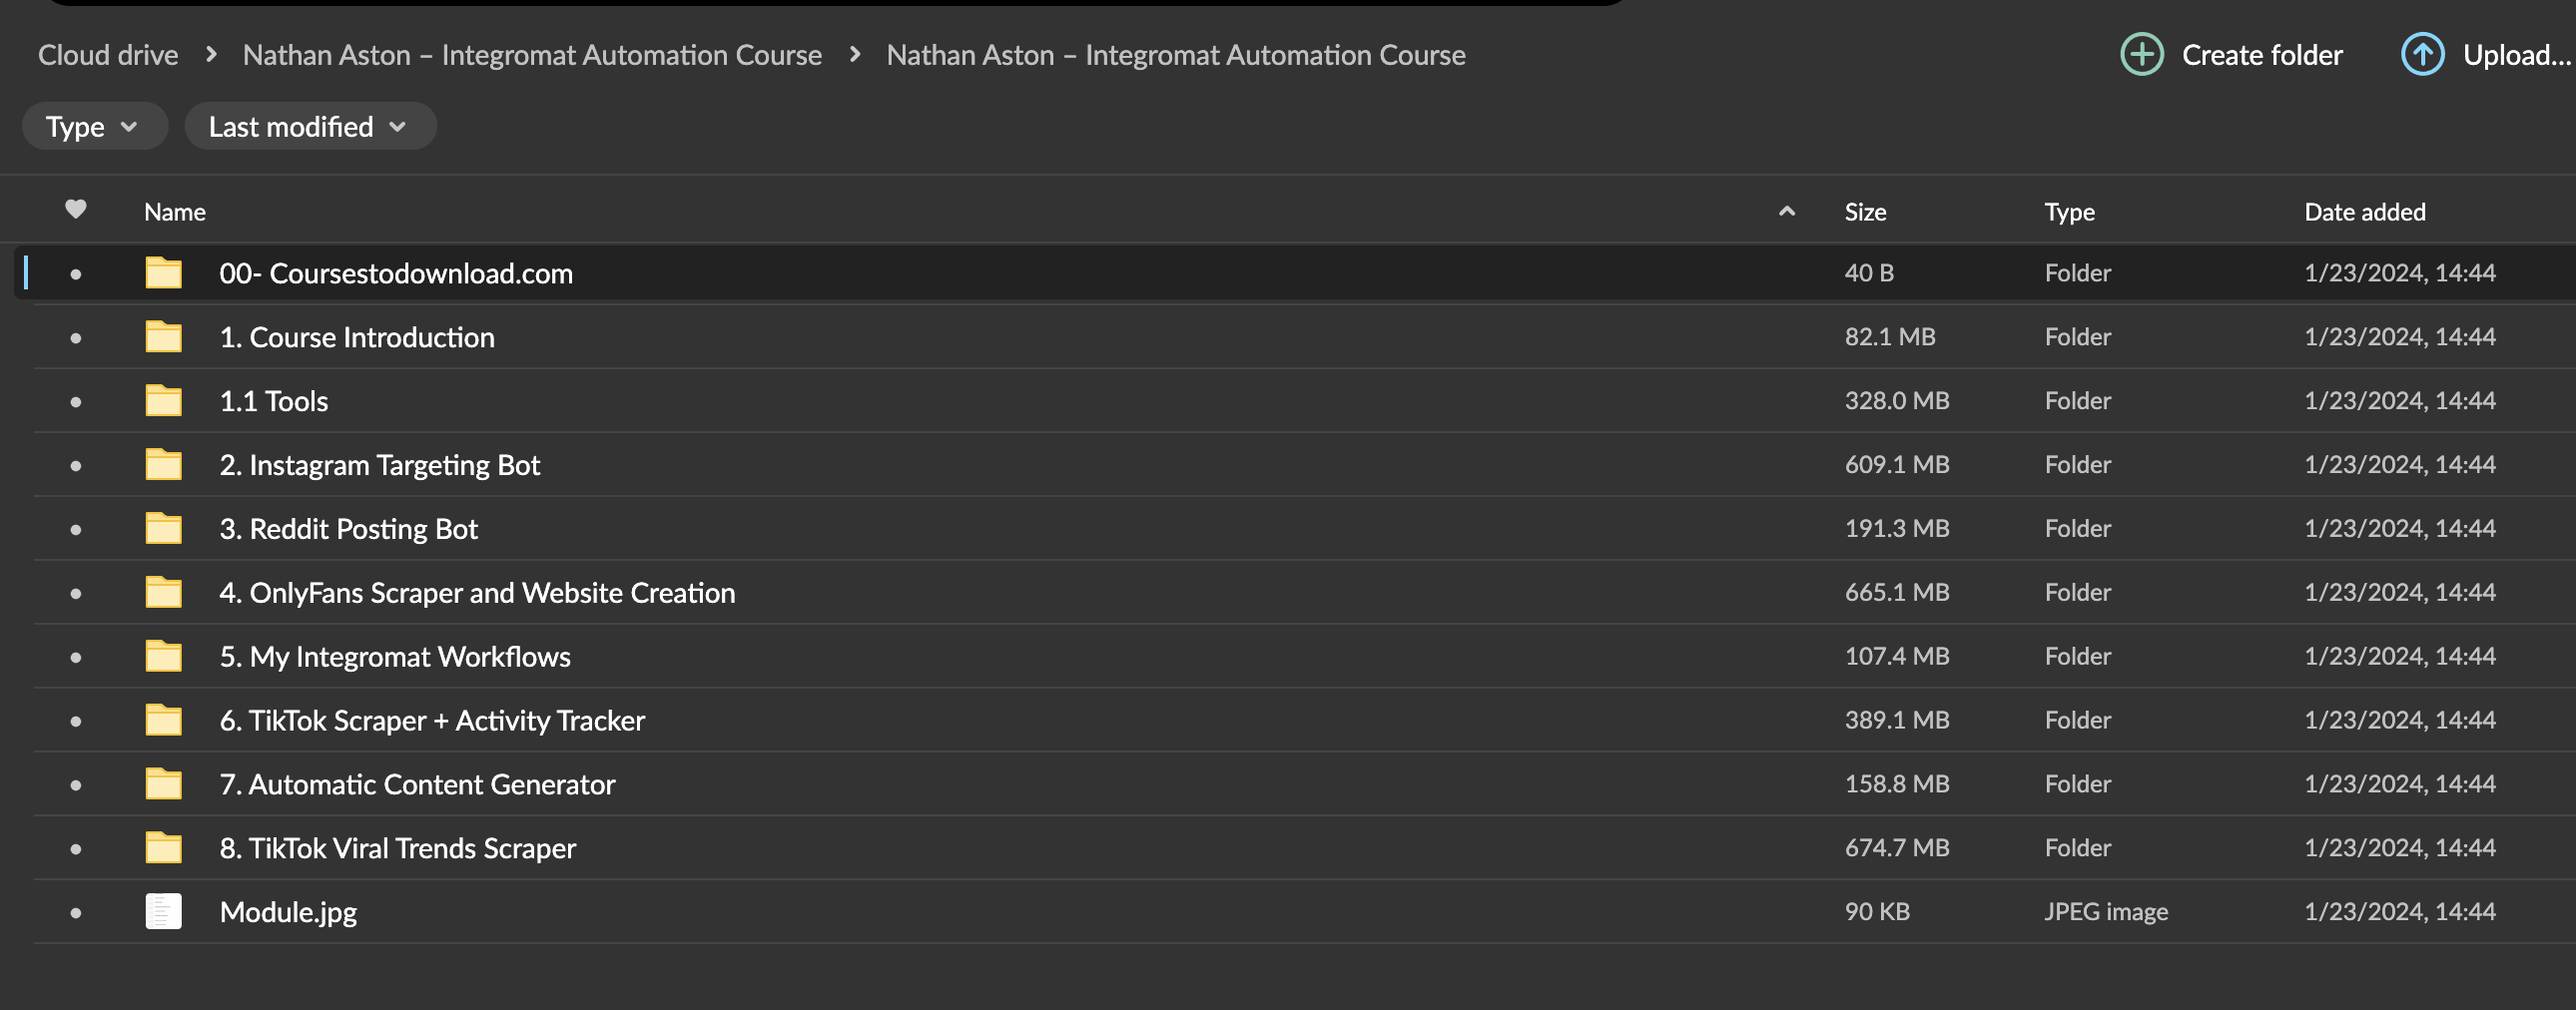 Nathan Aston – Integromat Automation Course Download